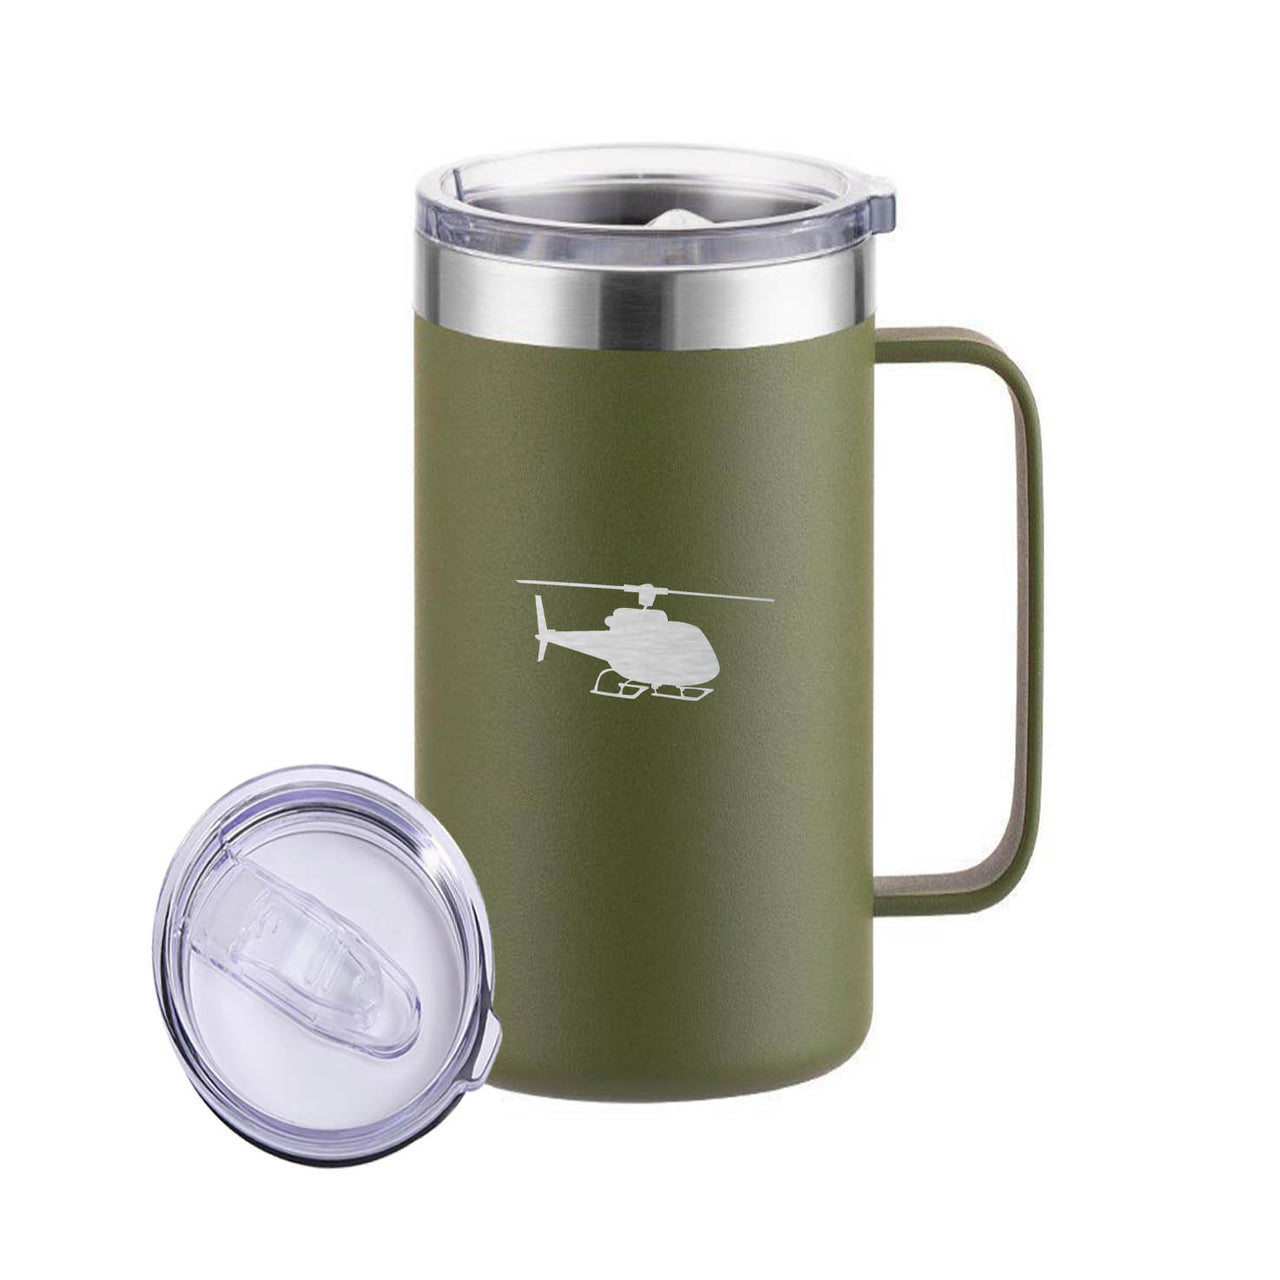 Helicopter Designed Stainless Steel Beer Mugs